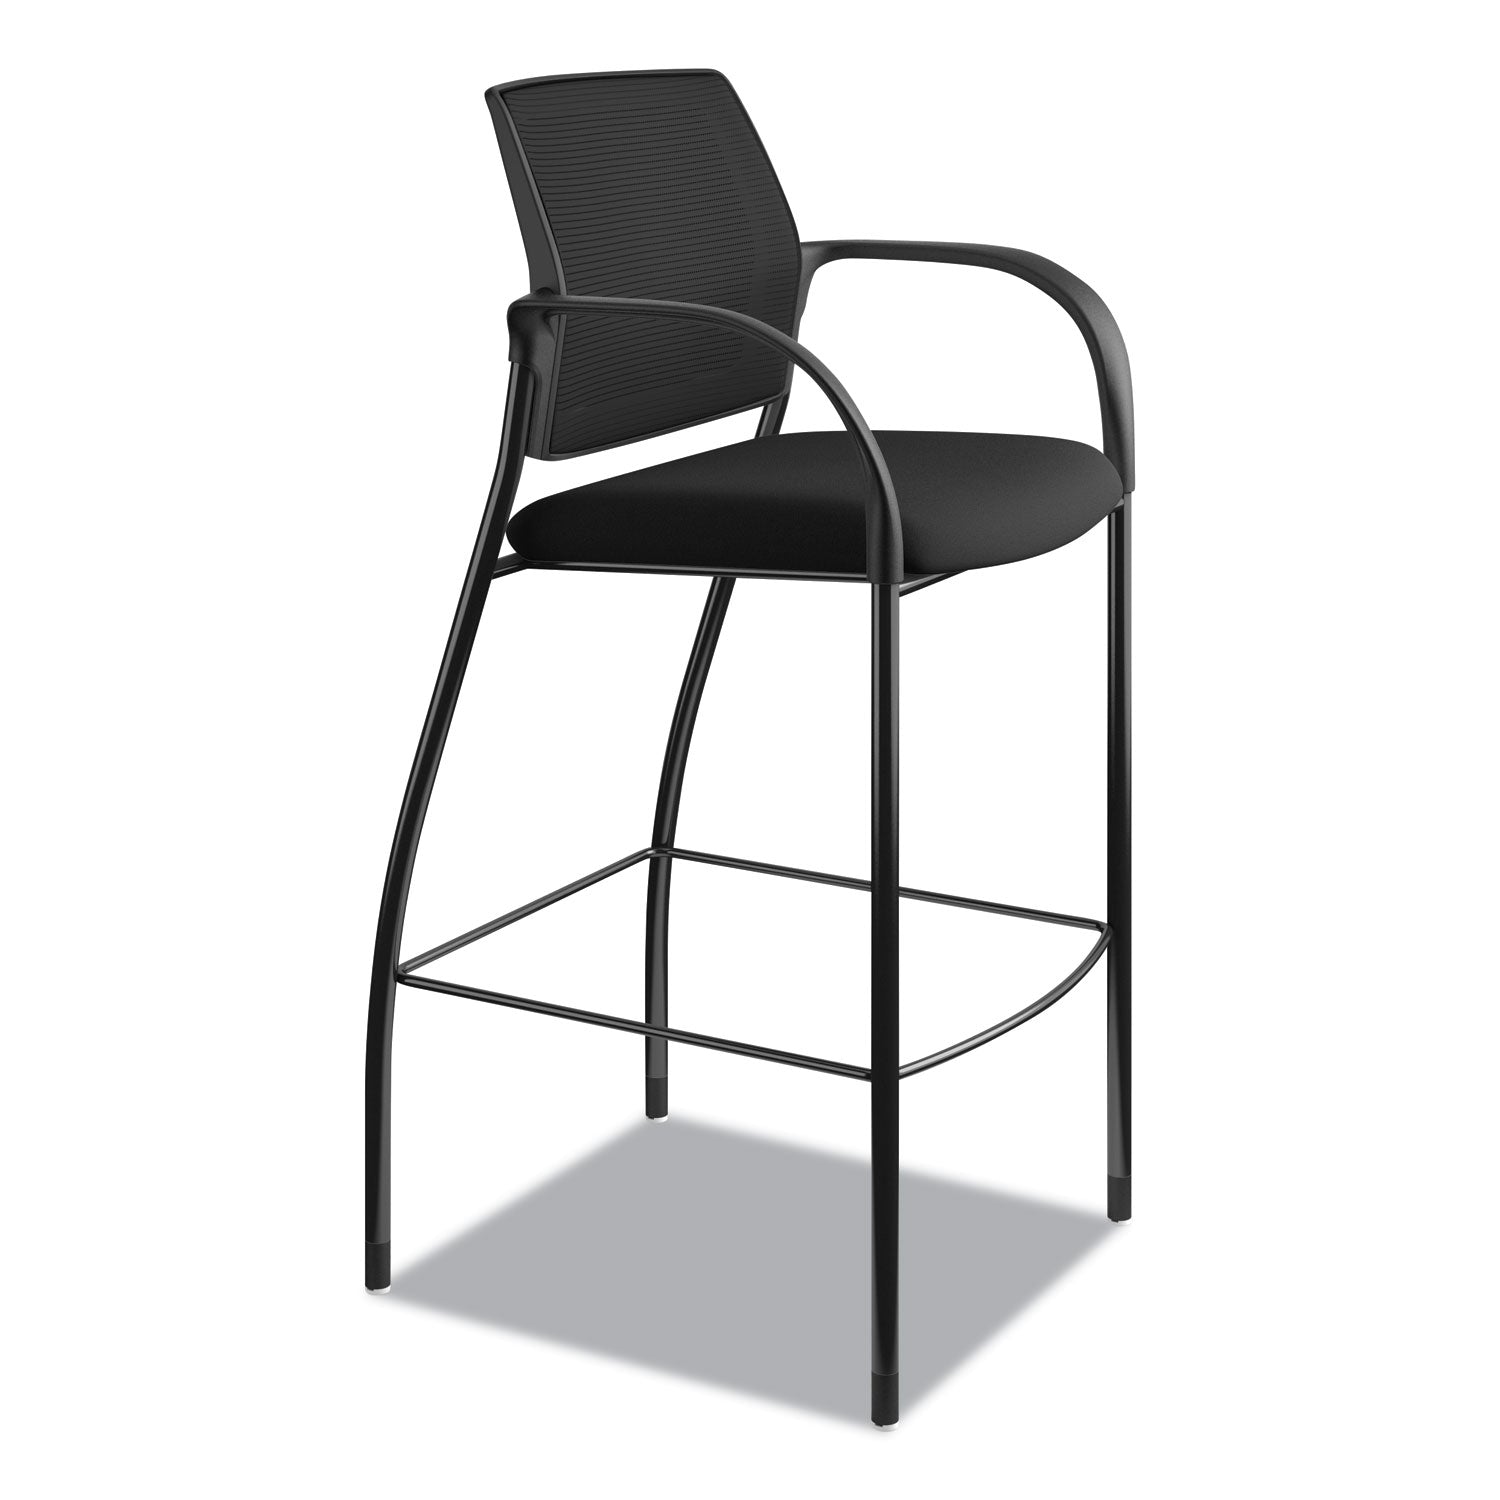 ignition-20-ilira-stretch-mesh-back-cafe-height-stool-supports-up-to-300-lb-31-high-seat-black-seat-back-black-base_honic108imcu10 - 2